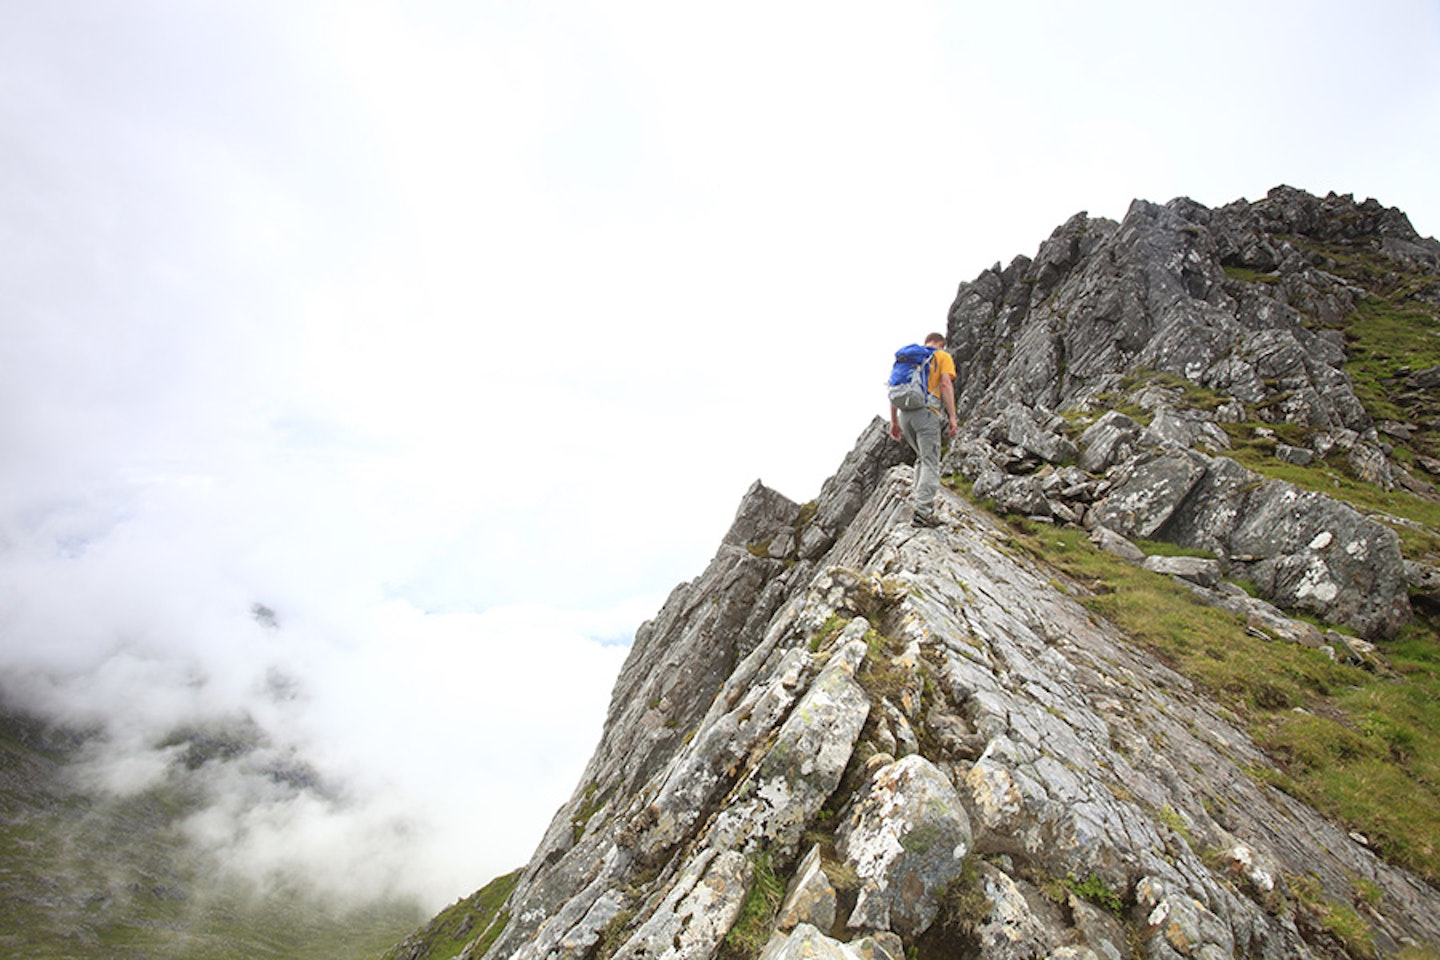 Getting high and into the clouds on the Forcan Ridge